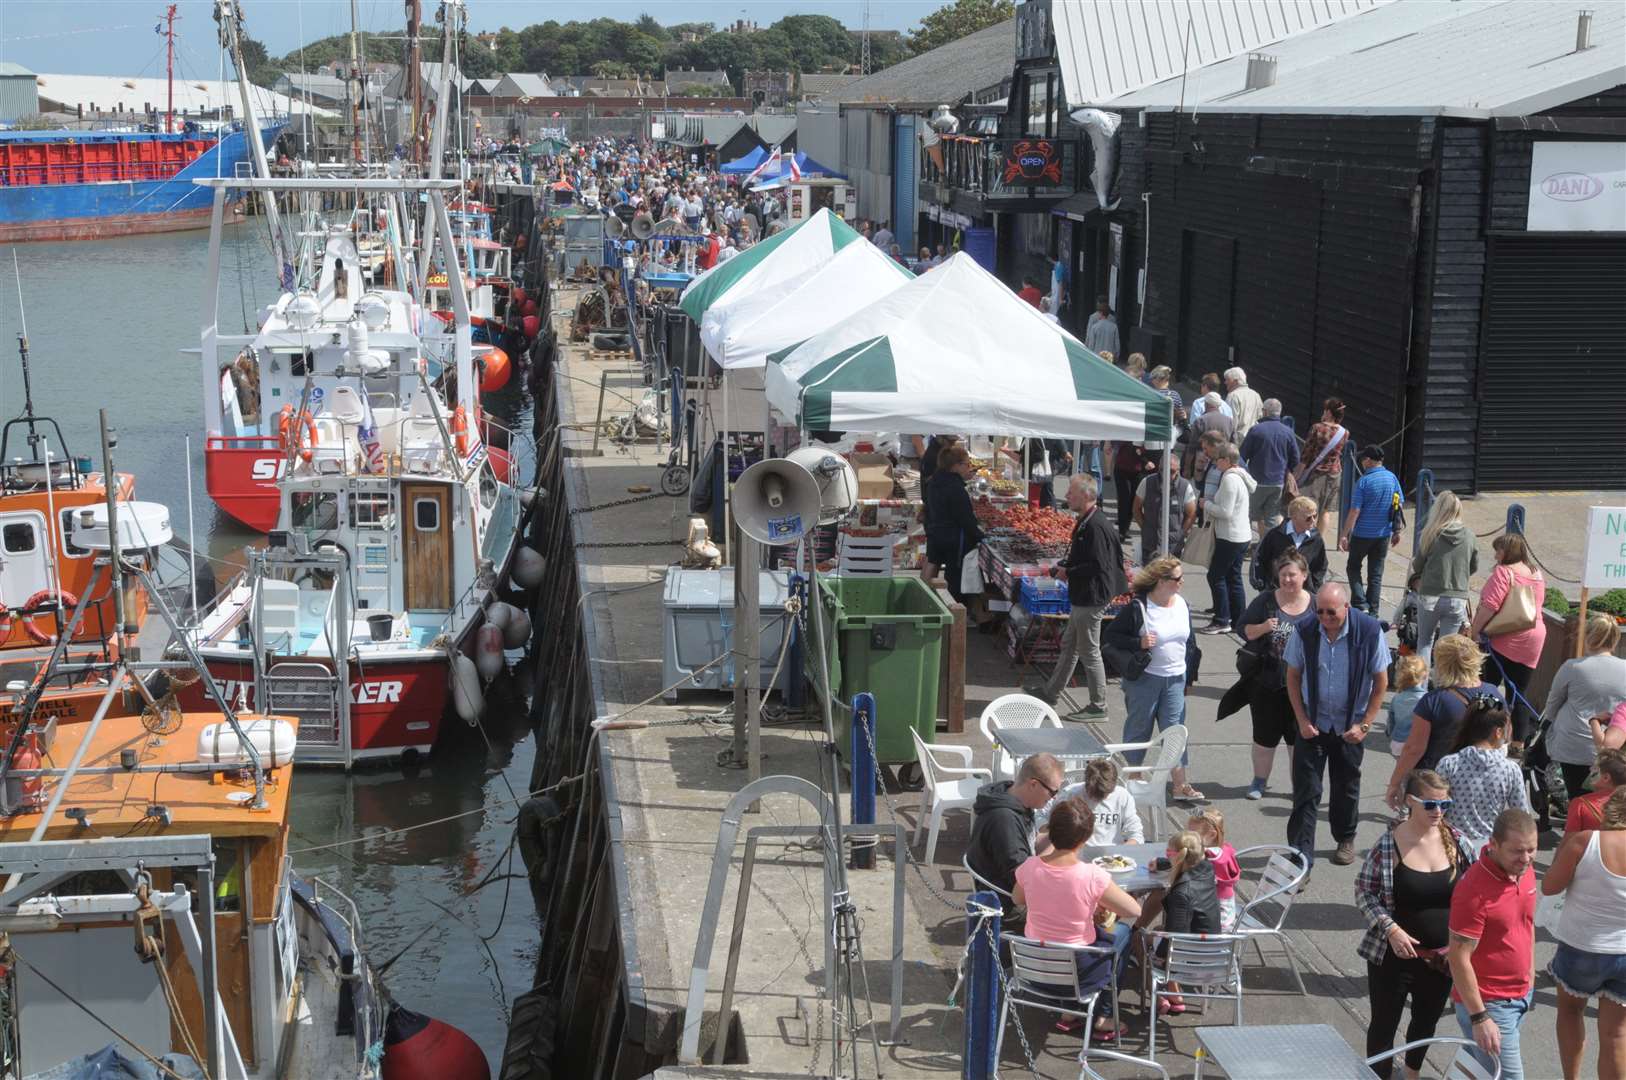 Whitstable is a top destination for seafood cuisine